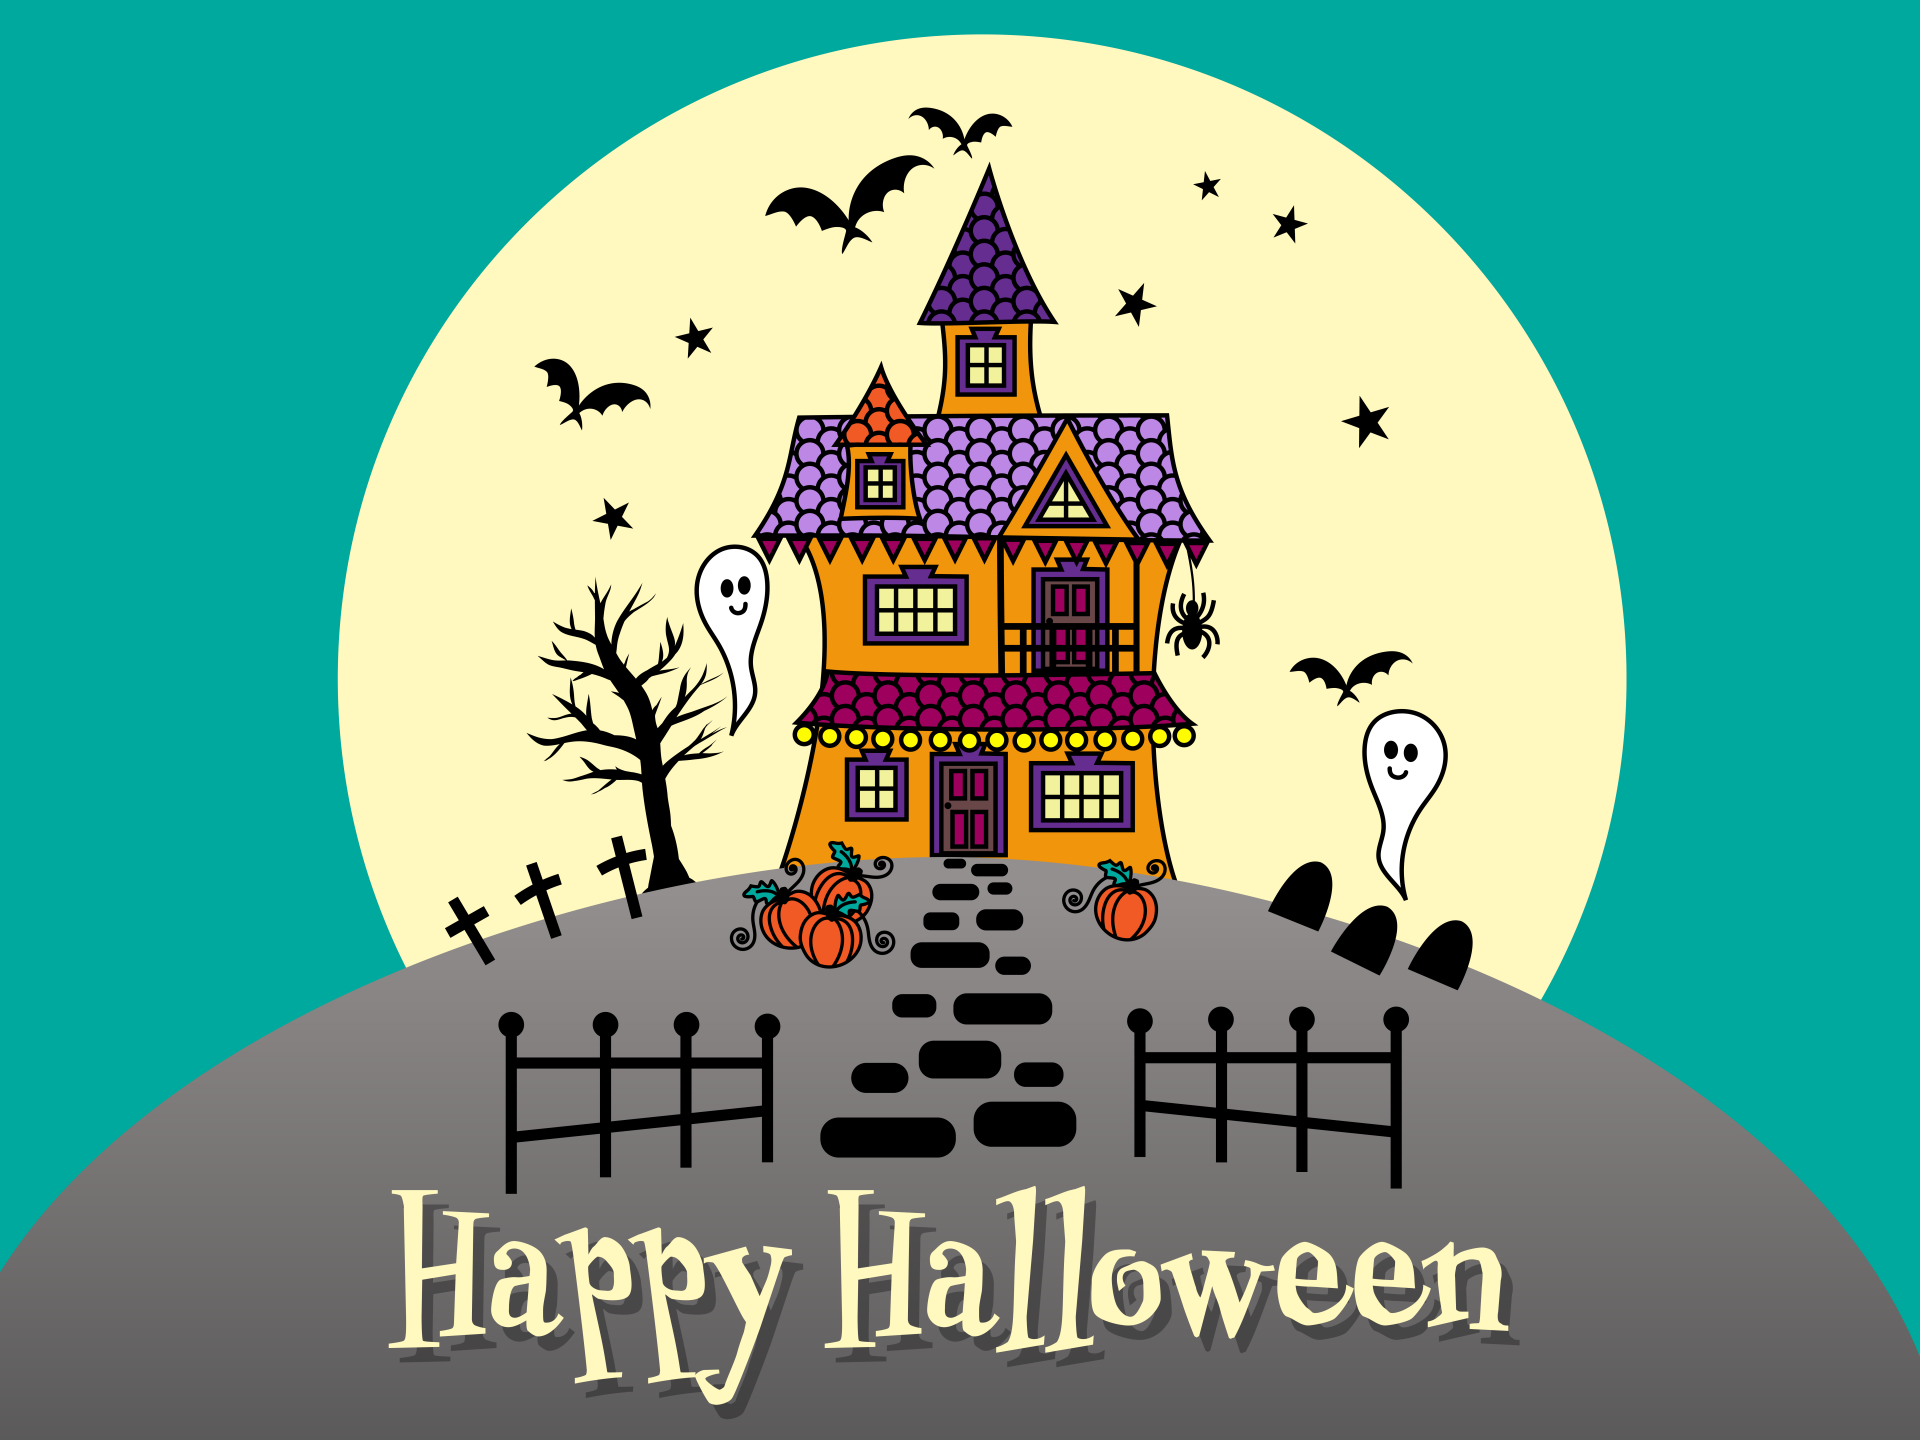 Halloween haunted house with ghosts, bats and gravestones illustration